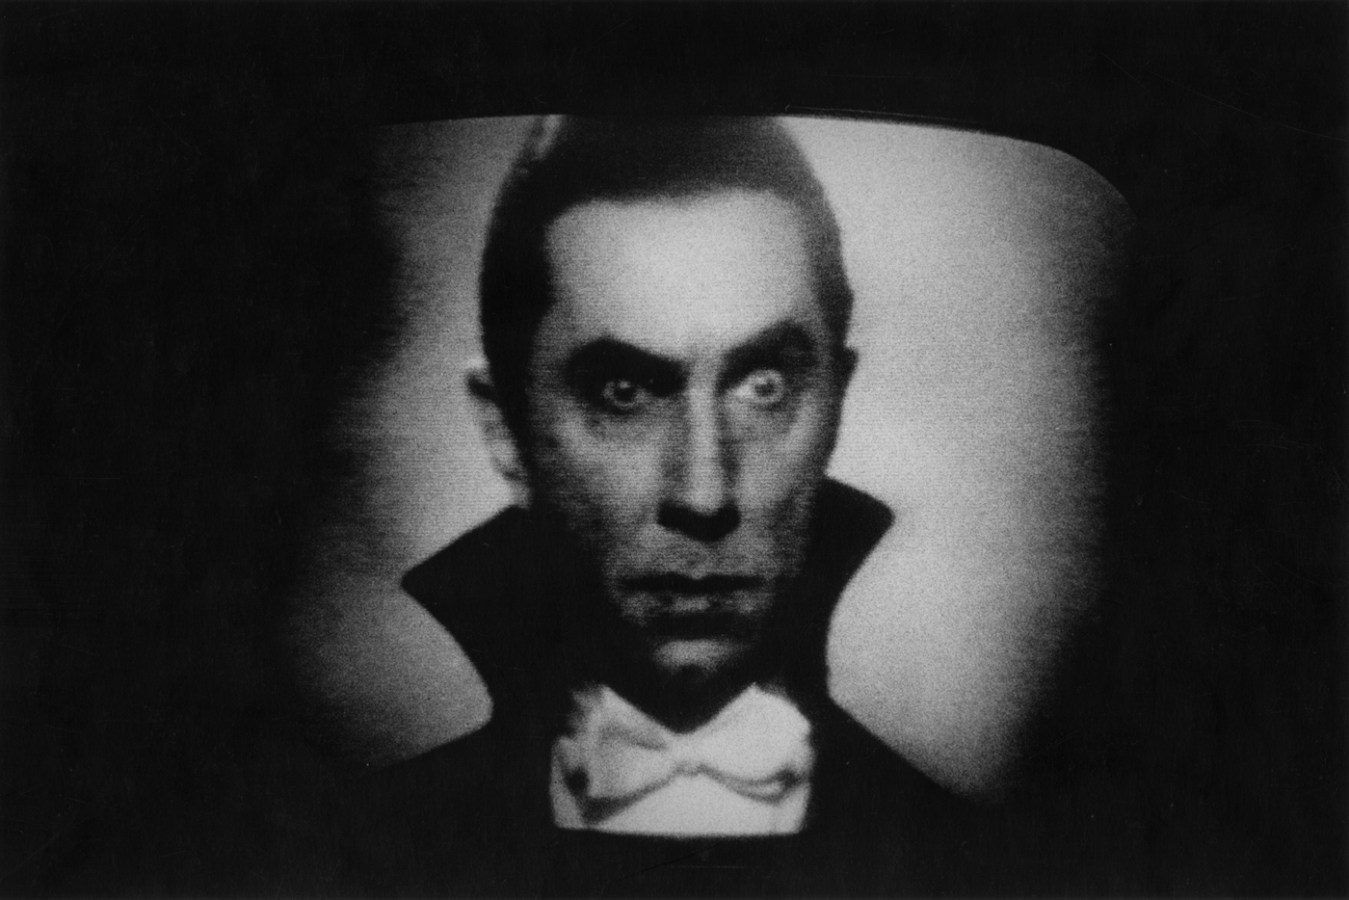 Black-and-white photograph of Dracula with one eyebrow raised on a movie screen